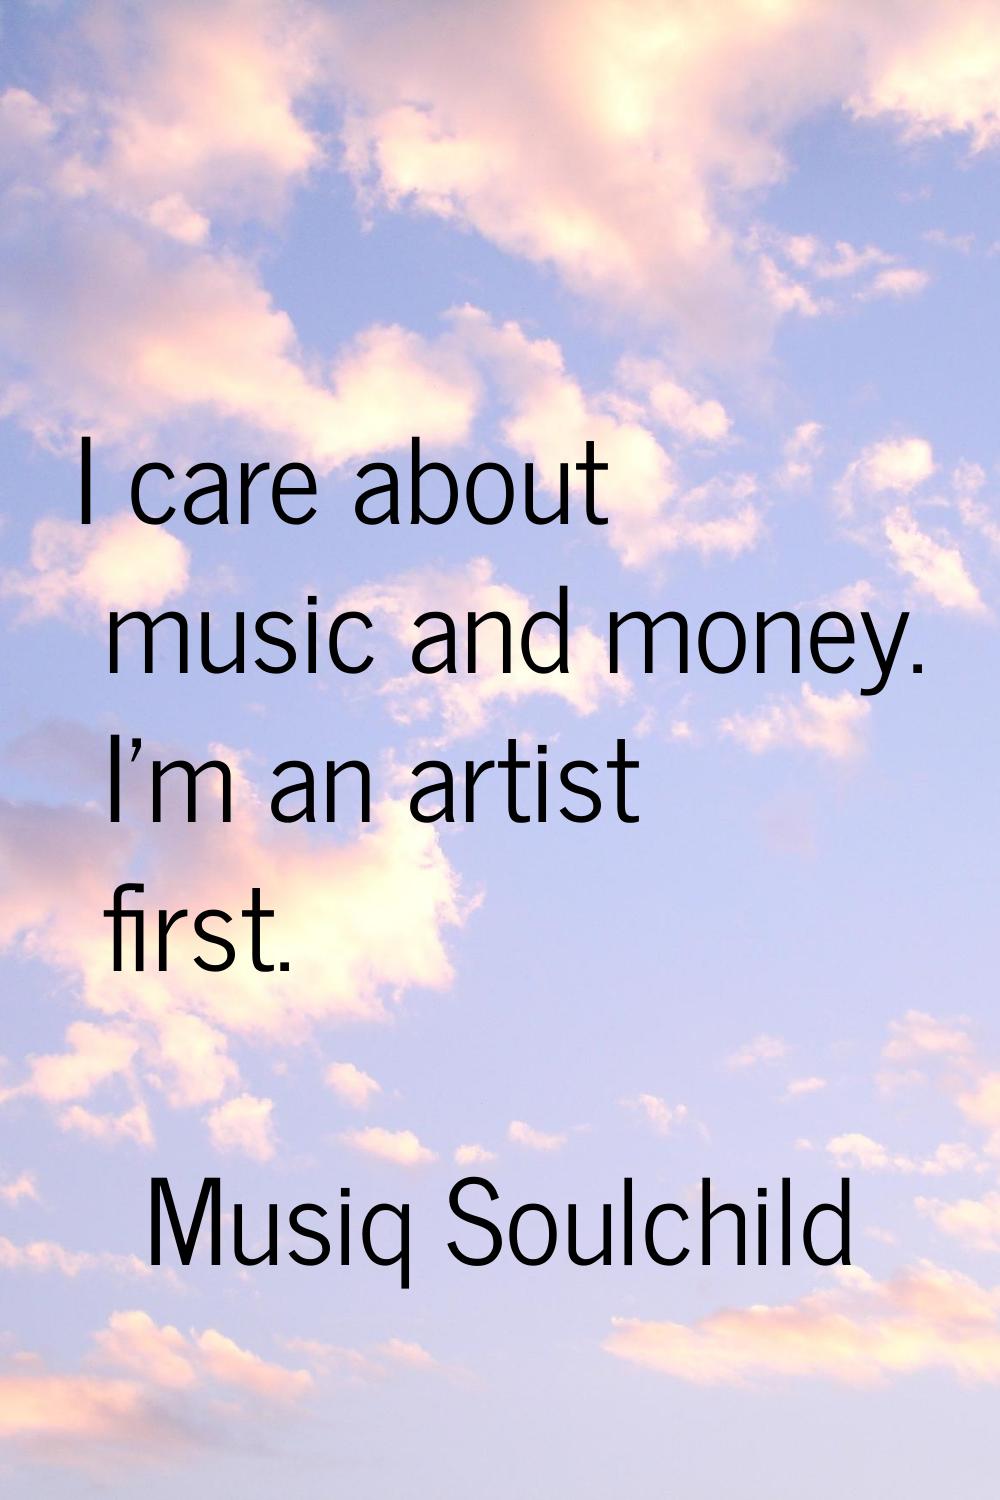 I care about music and money. I'm an artist first.